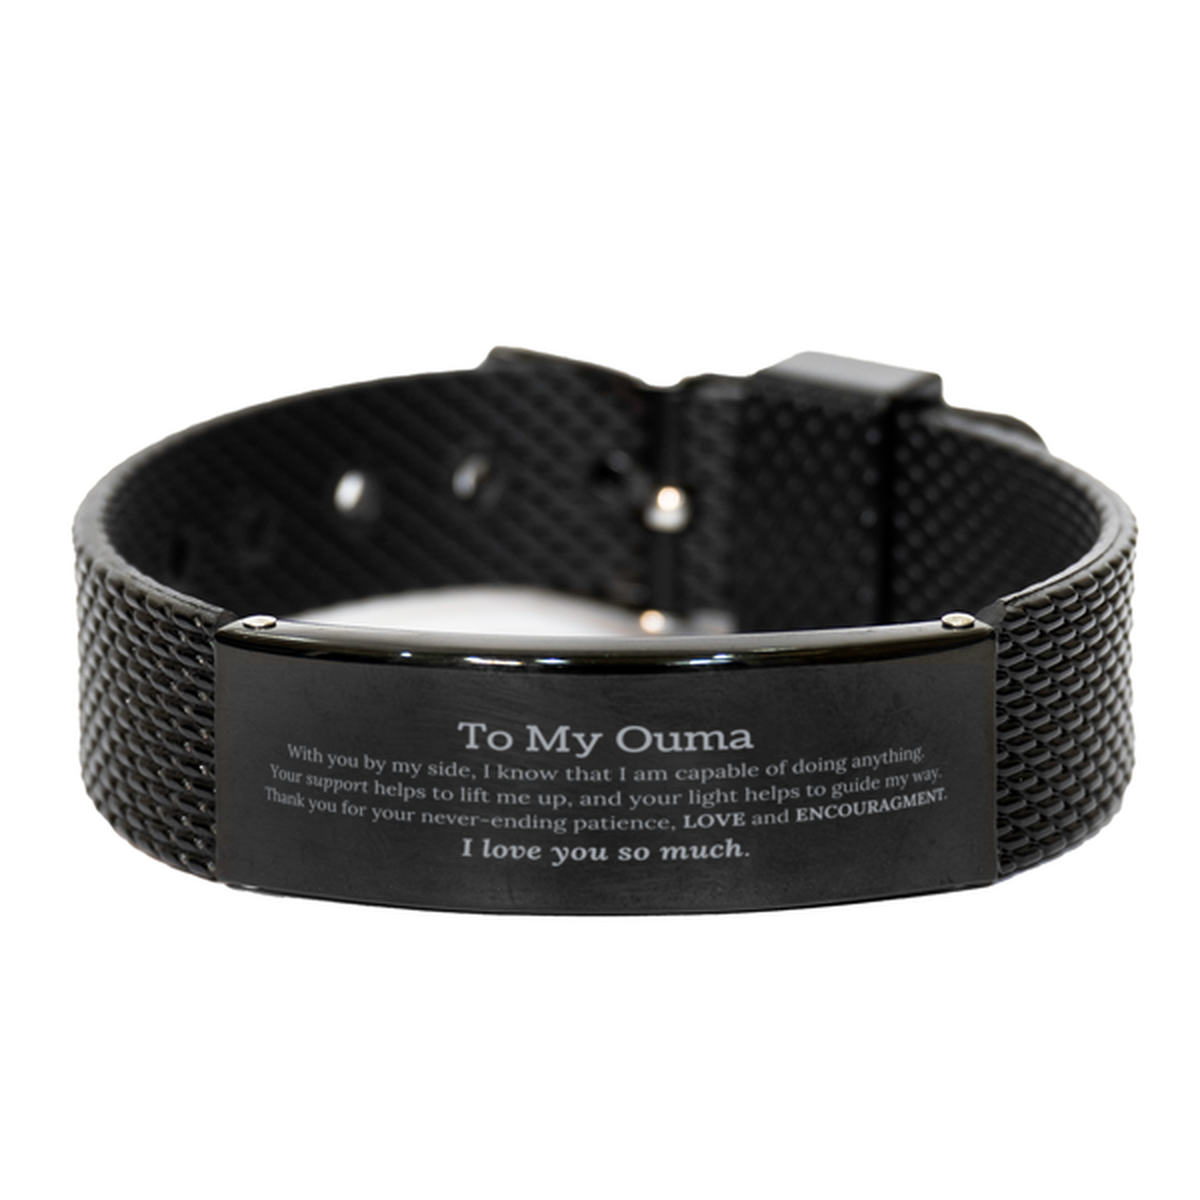 Appreciation Ouma Black Shark Mesh Bracelet Gifts, To My Ouma Birthday Christmas Wedding Keepsake Gifts for Ouma With you by my side, I know that I am capable of doing anything. I love you so much